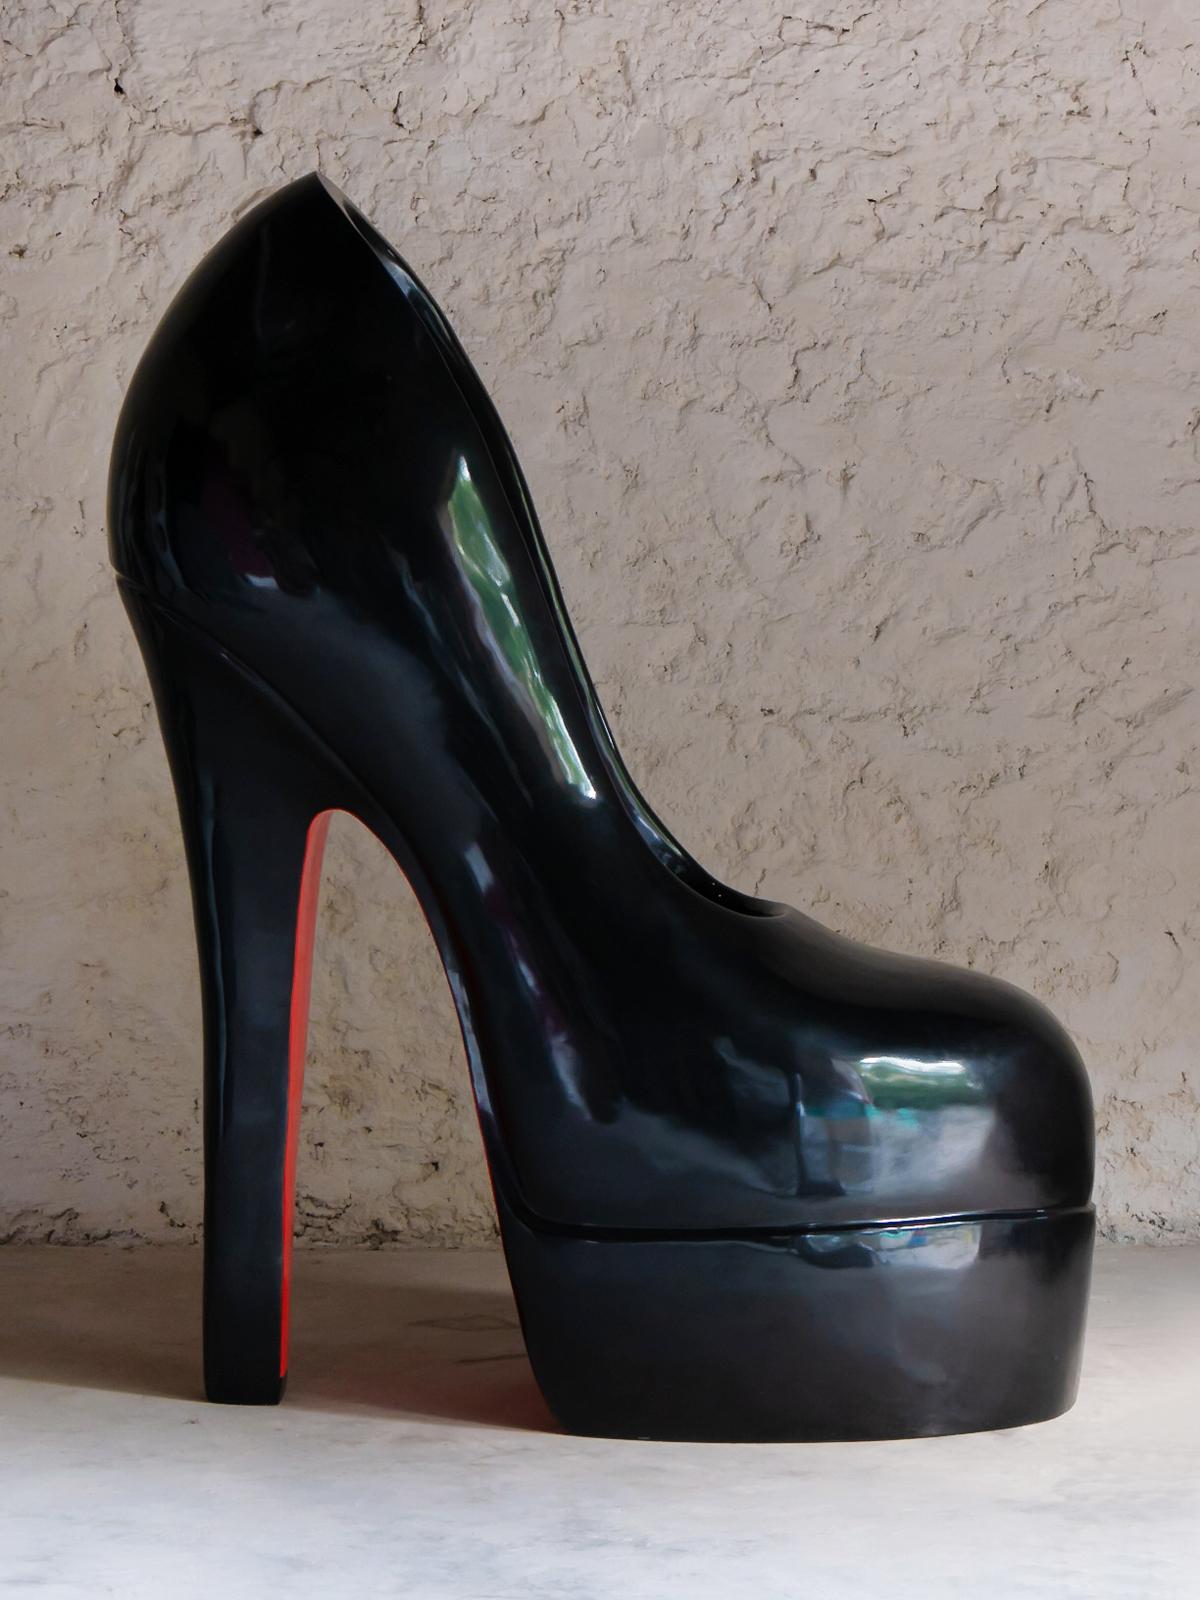 Louboutin black shoe sculpture,
Limited edition of 4 pieces. In black
lacquered finish.
Exceptional piece.